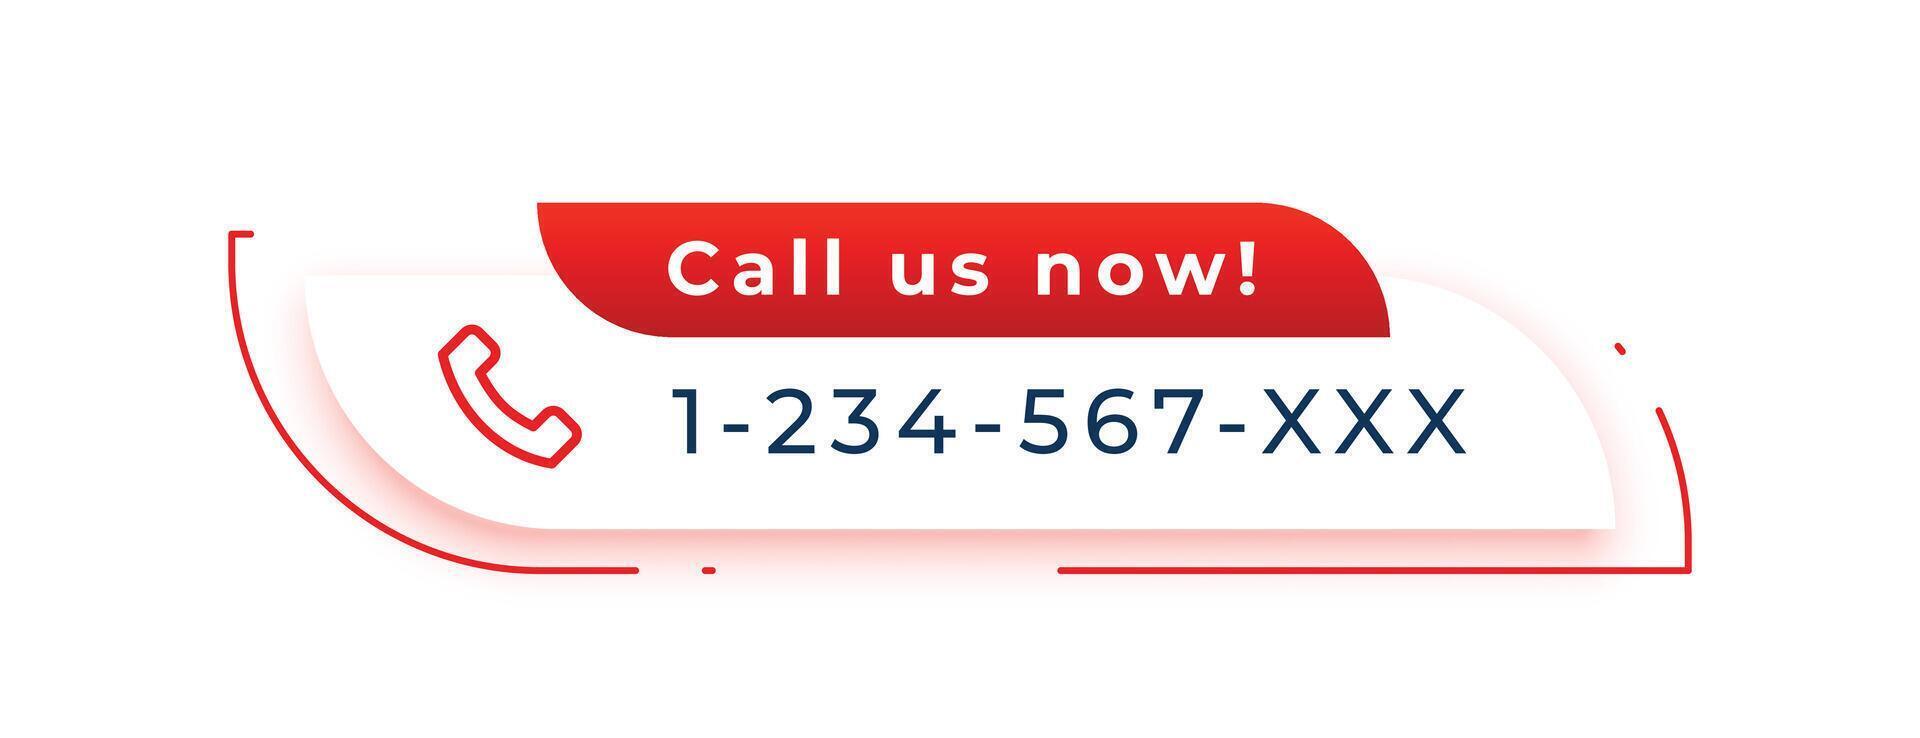 modern call us now header template for business marketing vector